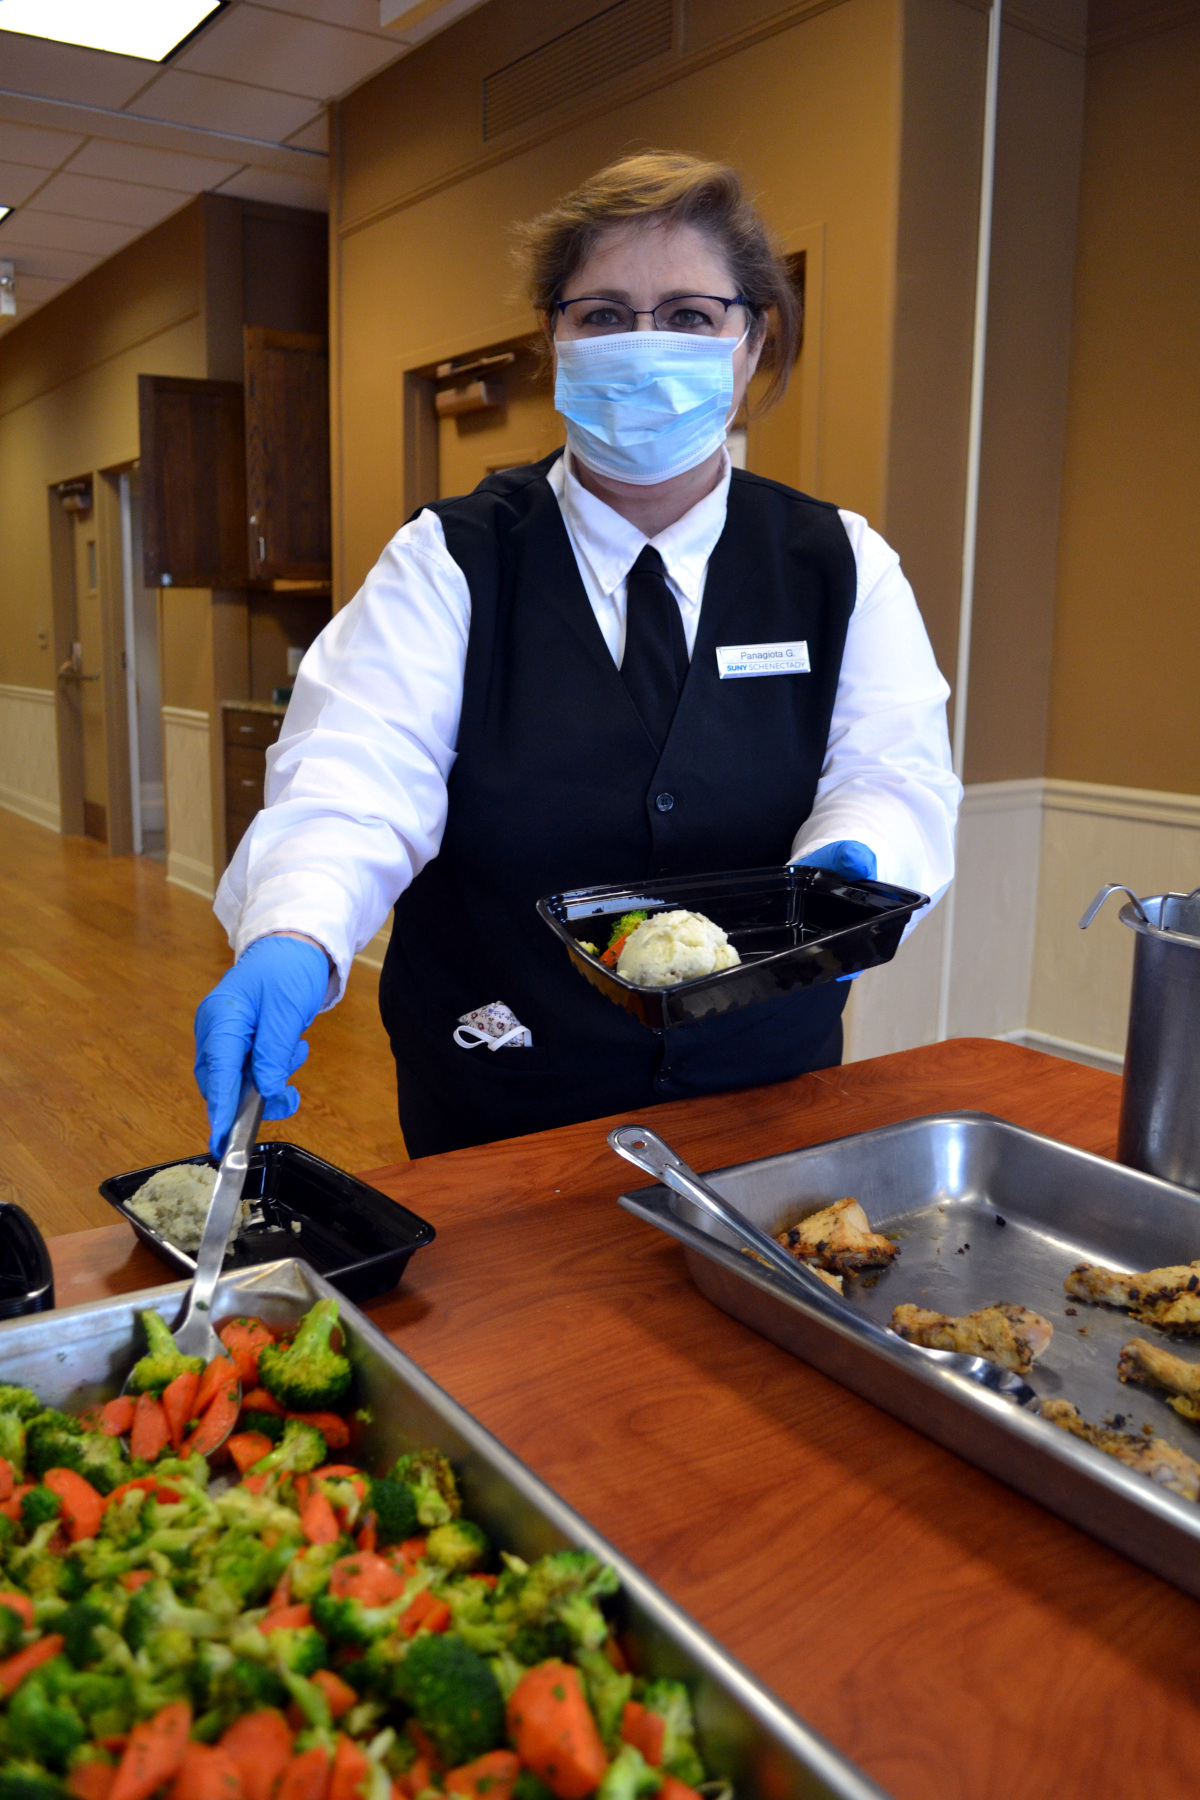 Hospitality student in uniform putting vegetables into a container for a prepared meal.